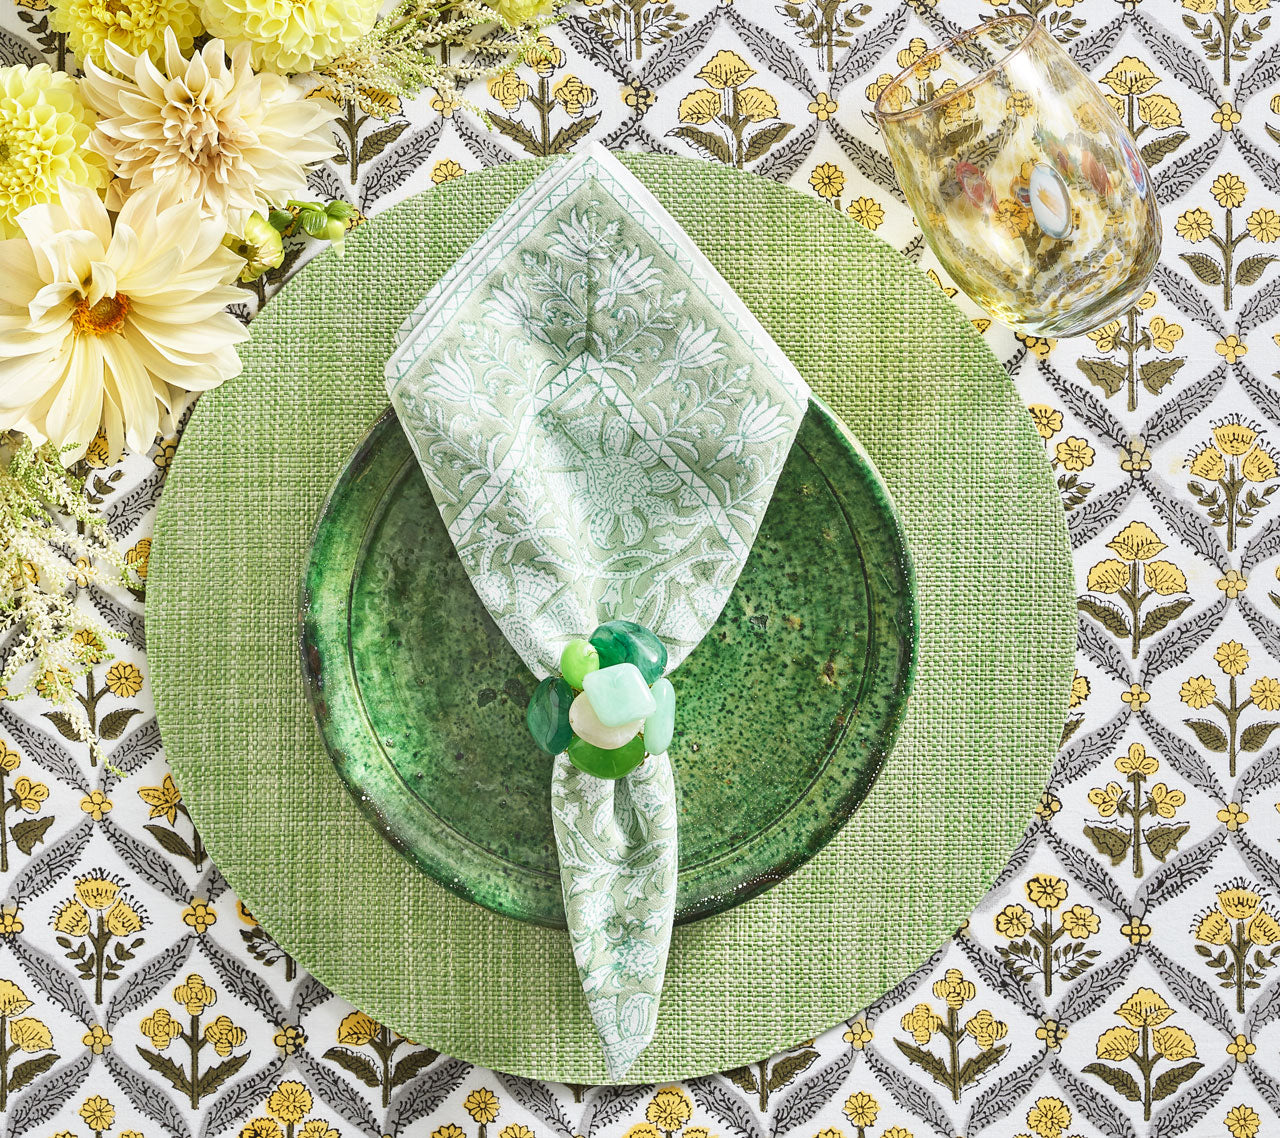 Green place setting featuring the Portofino Placemat in green